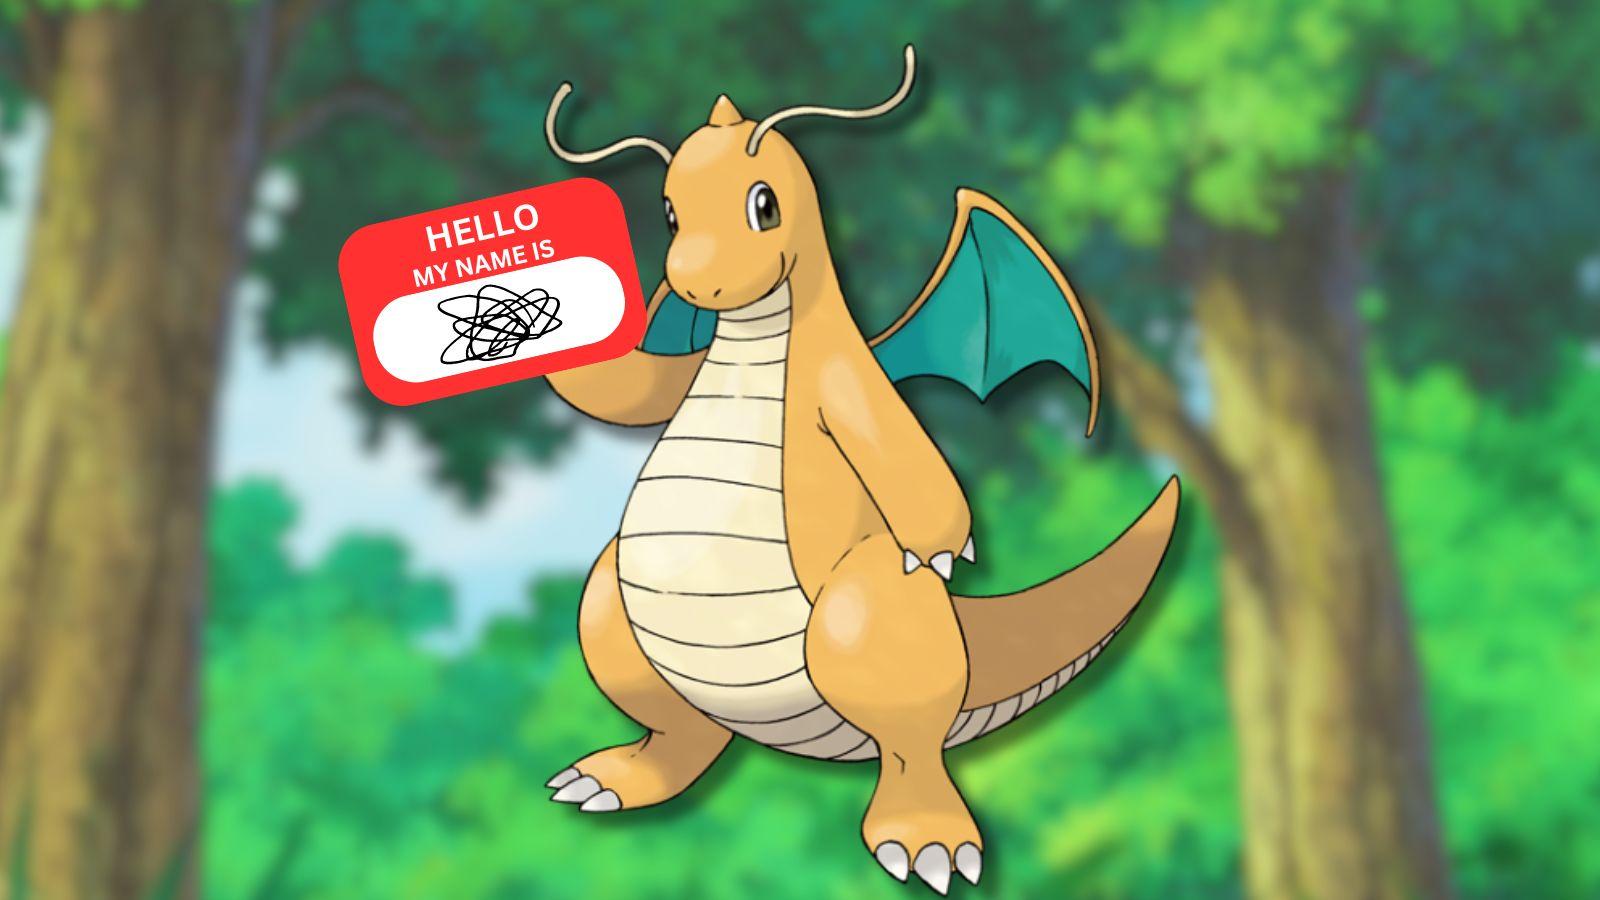 Dragonite with a name tag and Pokemon anime forest background.